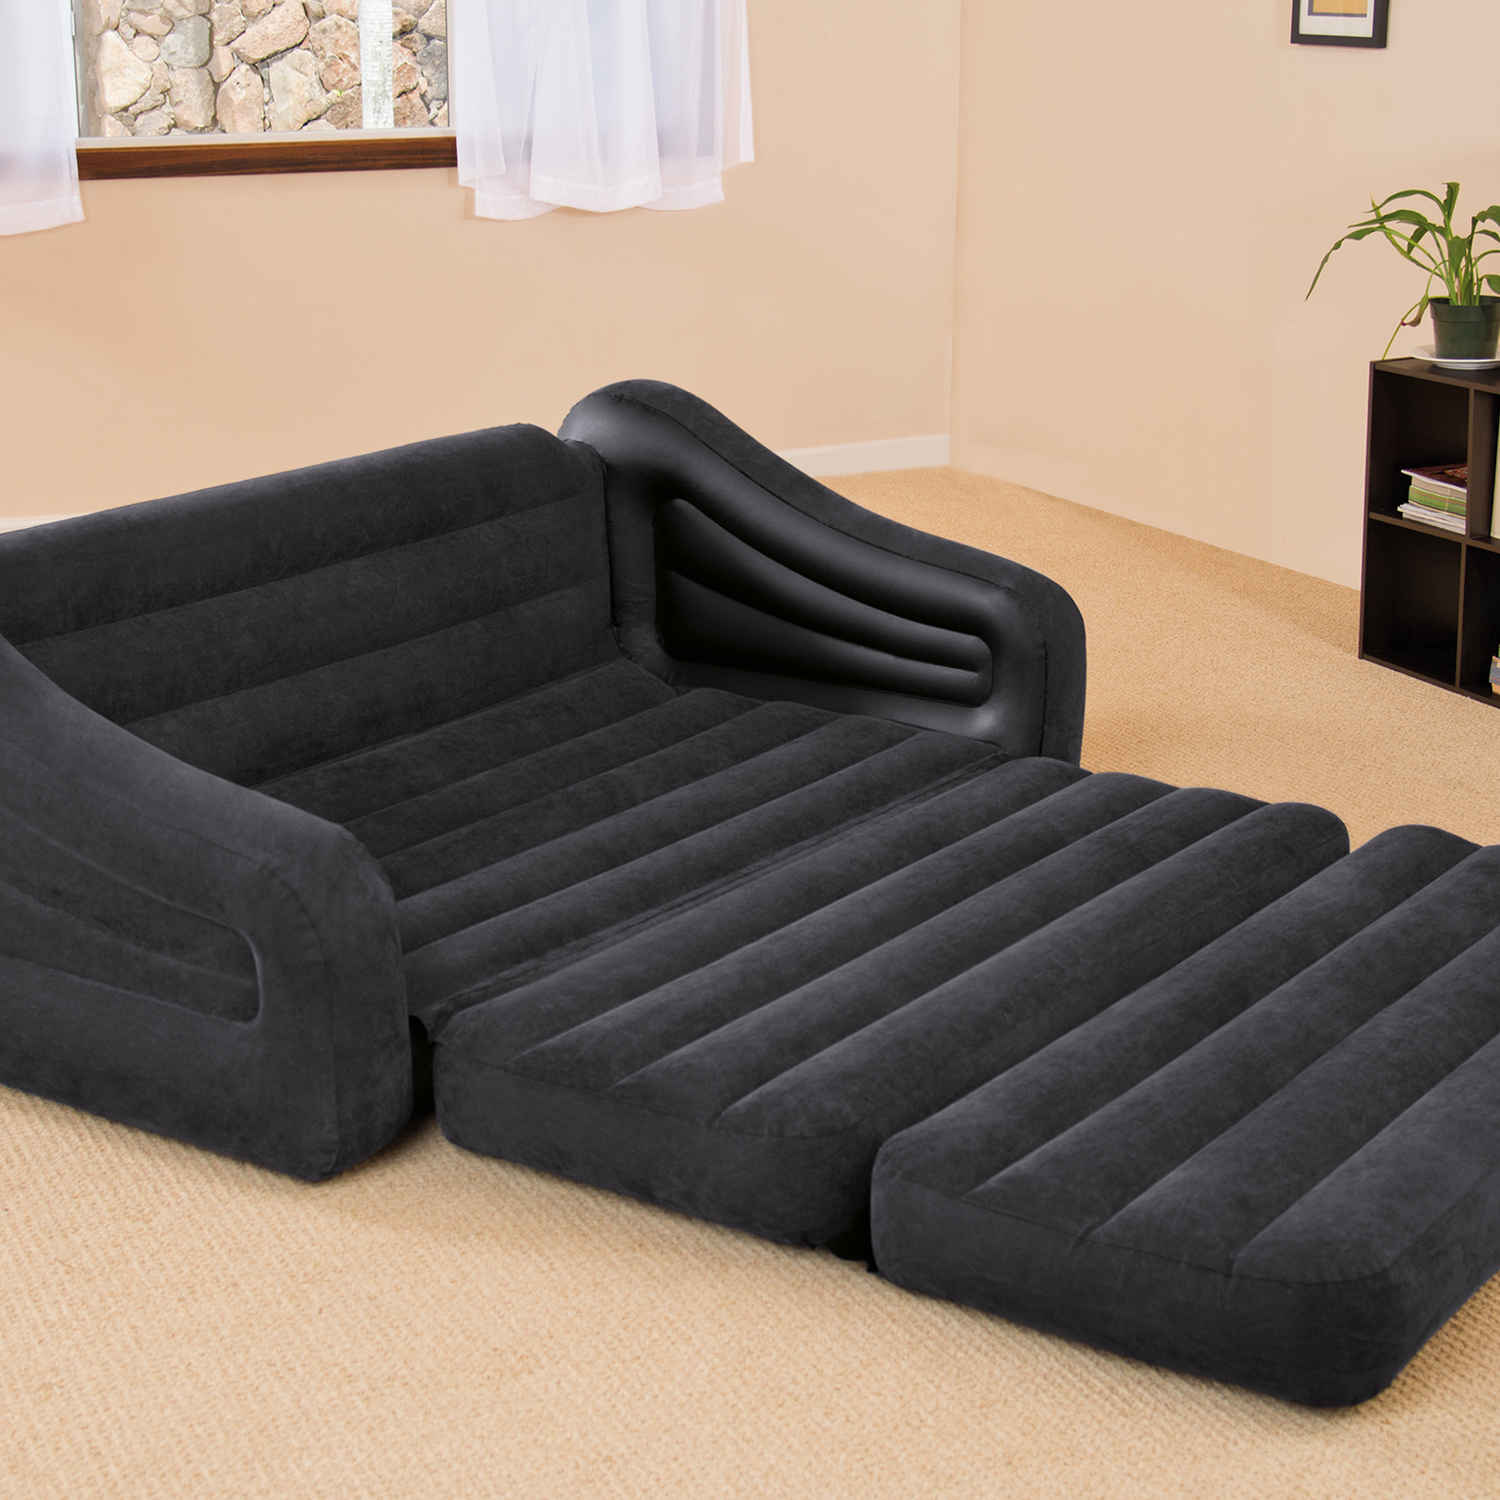 Intex Inflatable Queen Size Pull-Out Futon Sofa Couch Bed ...